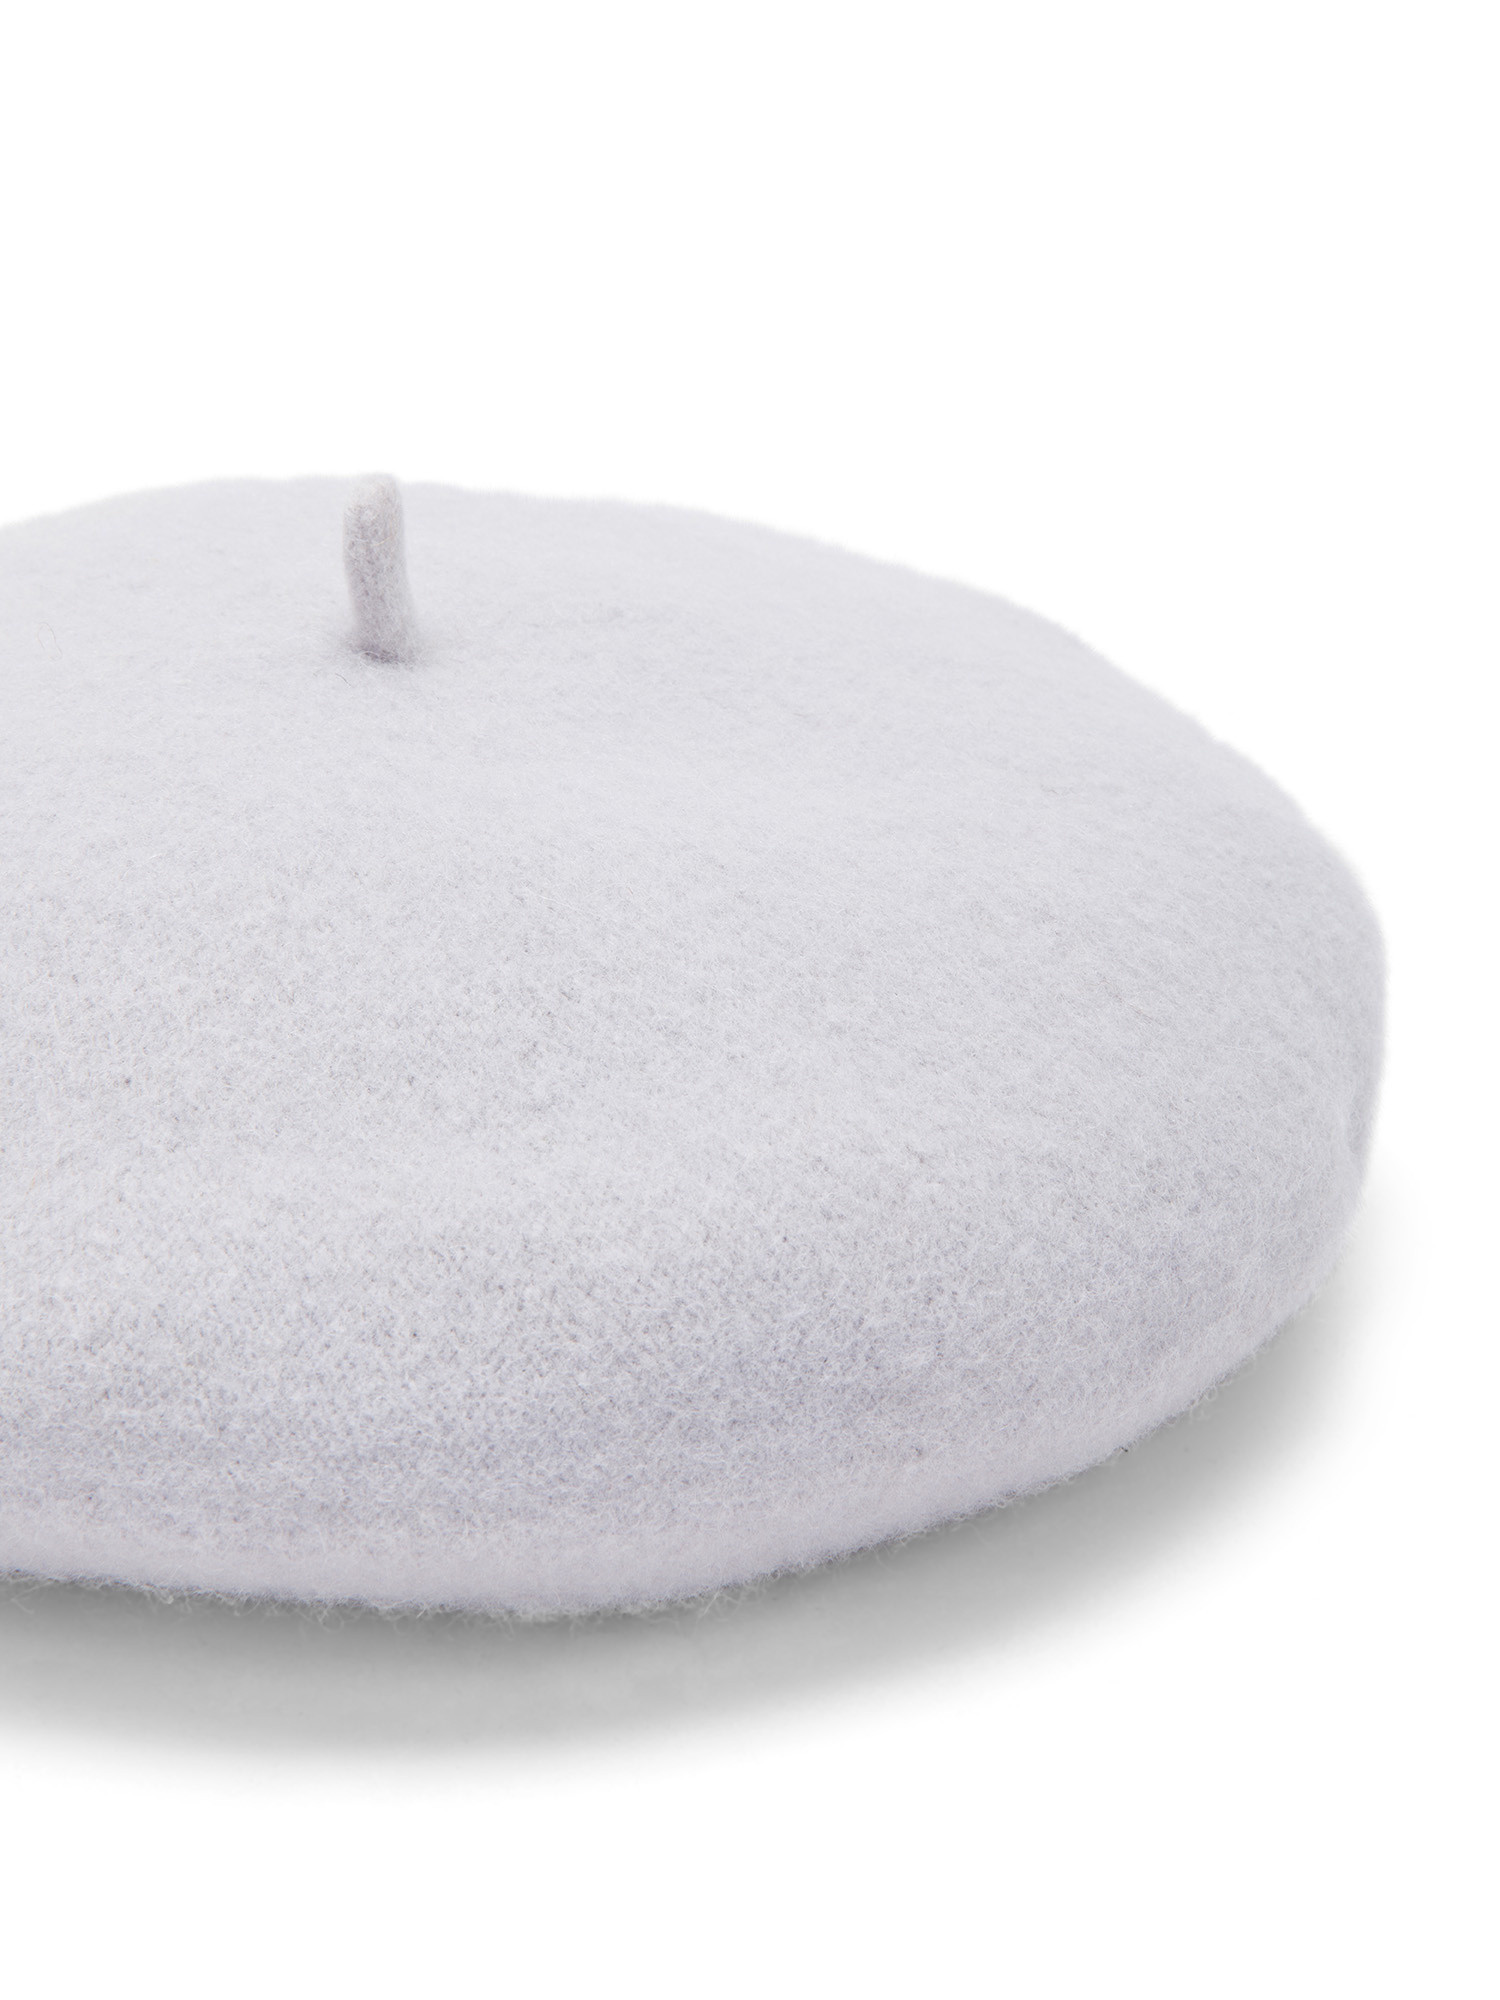 Beret in wool blend, White, large image number 1